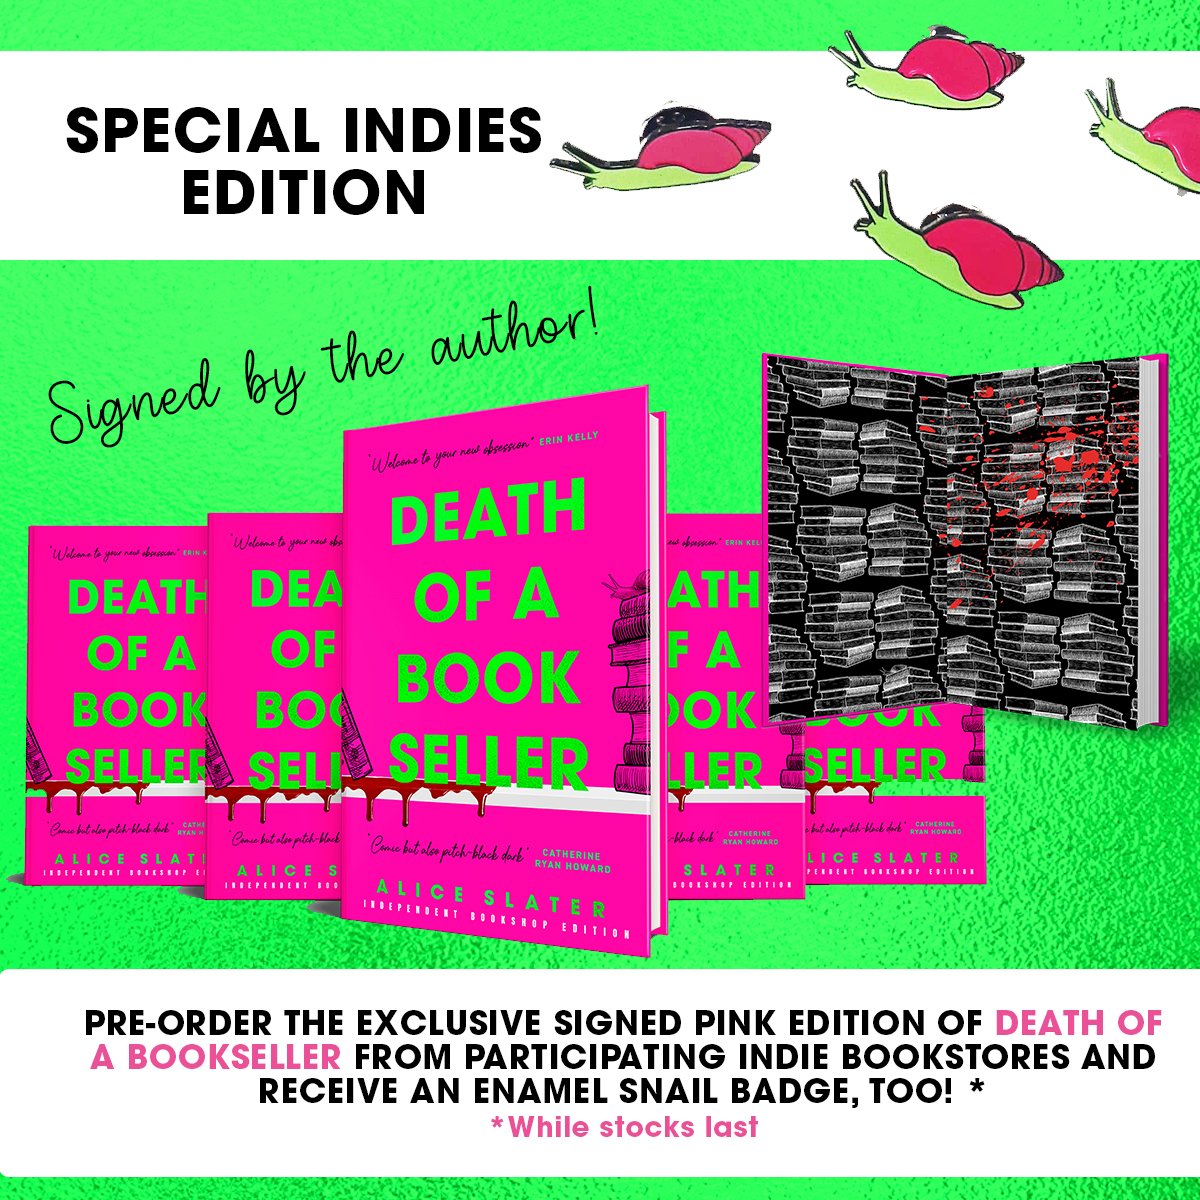 We're thrilled to be on the list of bookshops stocking this exclusive signed pink edition of @alicemjslater's debut thriller #DeathOfABookseller! The book comes out on the 27th of April, so make sure you pre-order your limited edition before then through indiesdoab.carrd.co